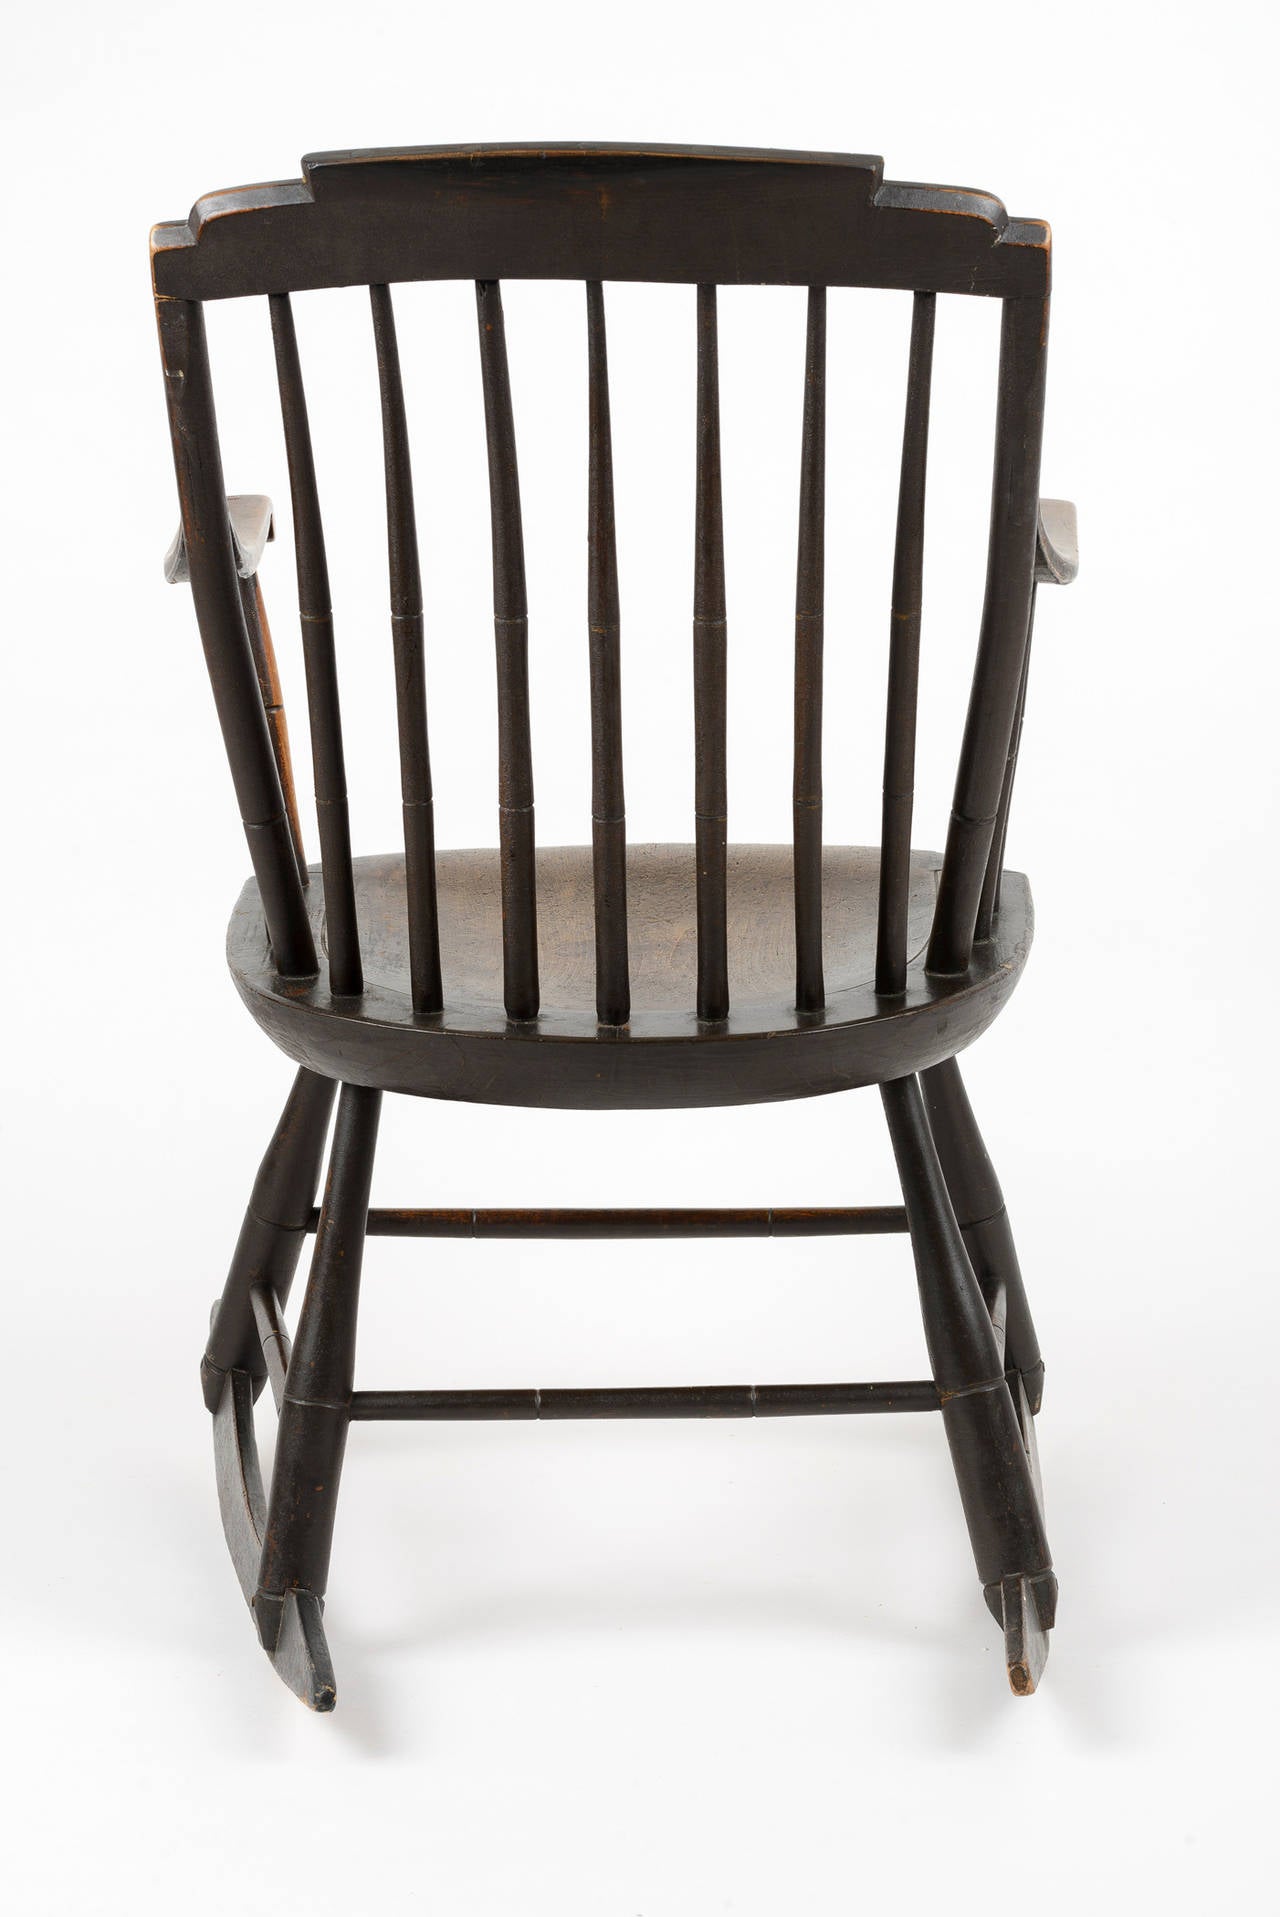 This Windsor rocker is from the Connecticut Valley in New Hampshire.  The step back top sits on tapered and bowed spindles that have decorated notch mid high on the back.  The arms are tapered with a delicate scroll end.  The chair has a spoon seat.